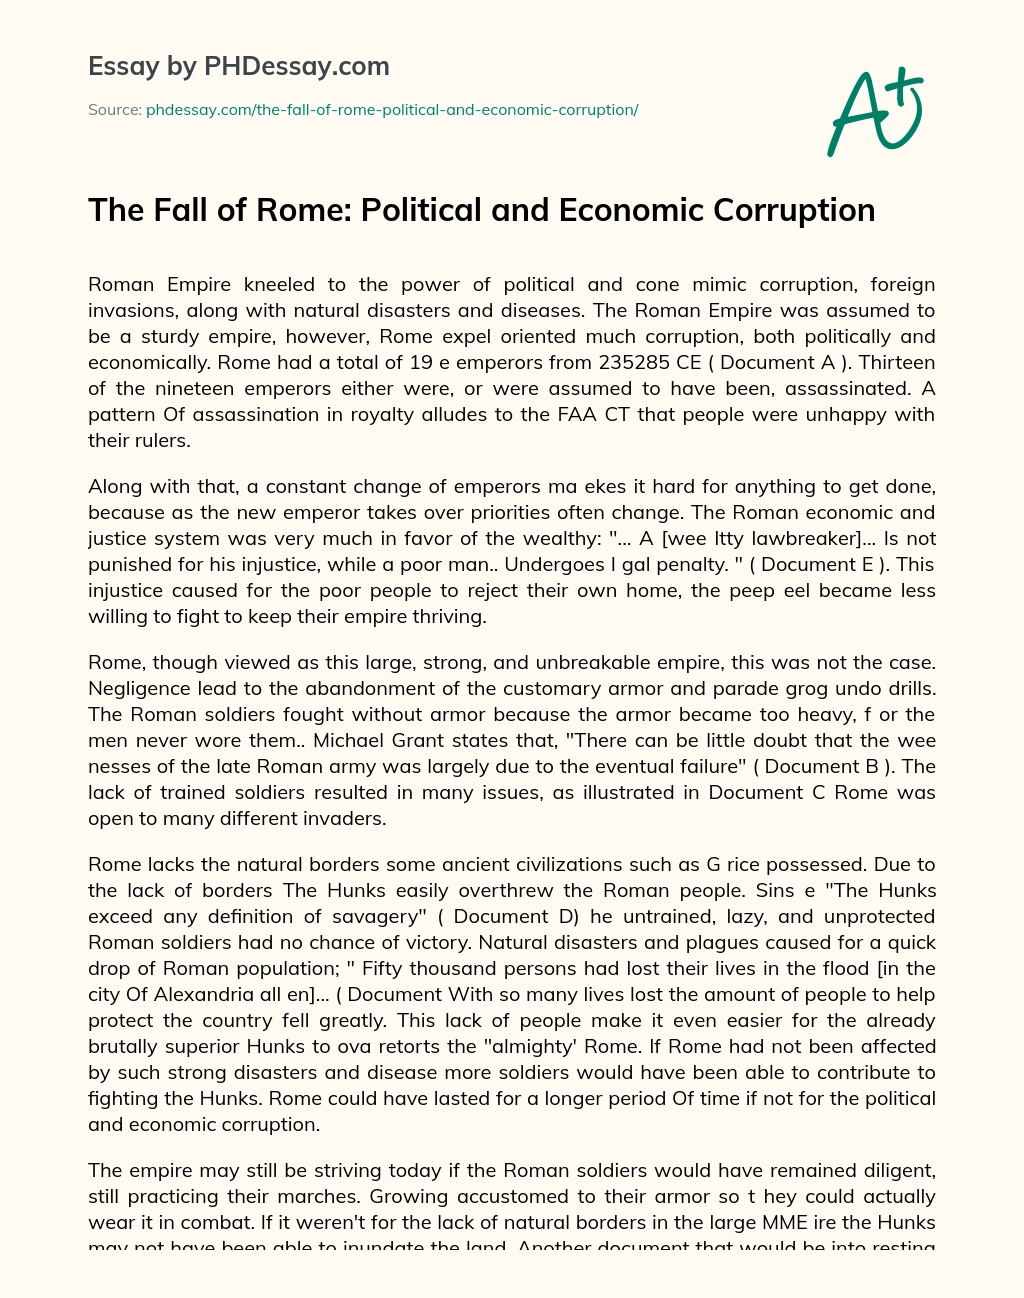 The Fall of Rome: Political and Economic Corruption essay